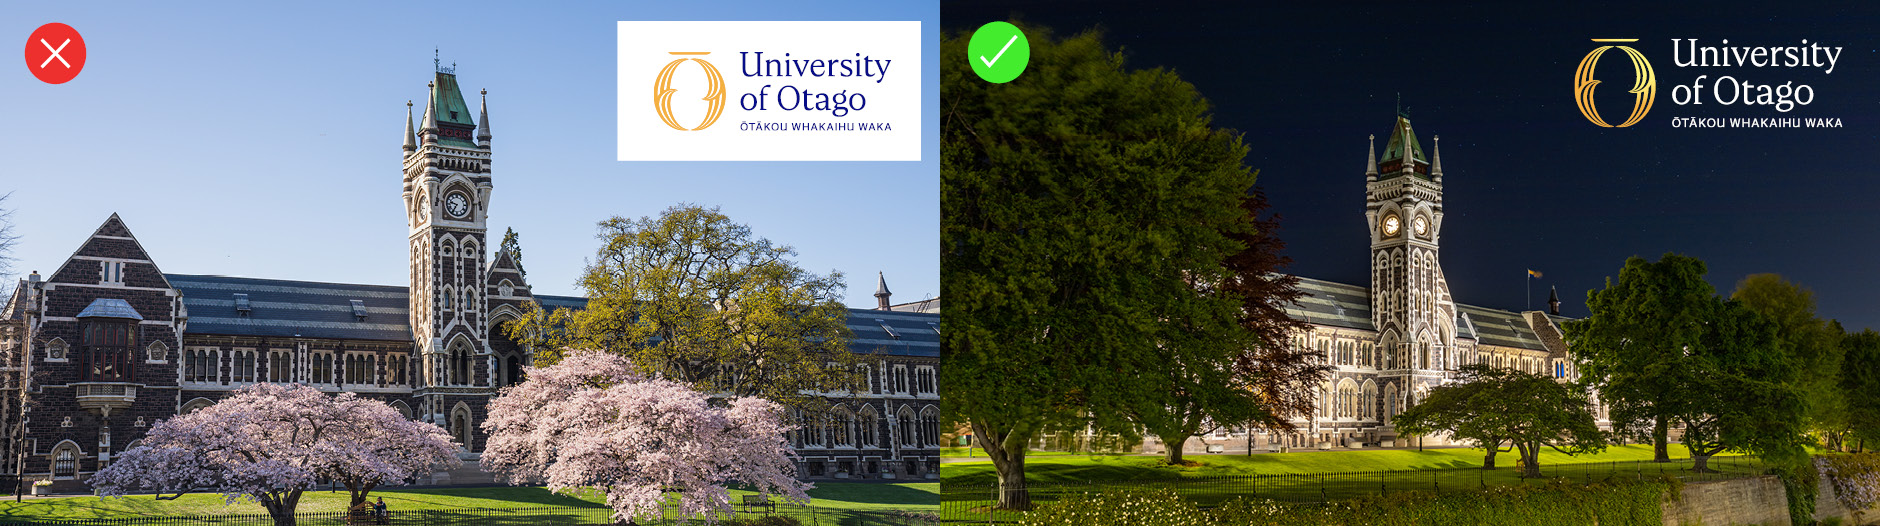 Examples of correct and incorrect compositions of the University of Otago wordmark with images of the Clocktower Building.